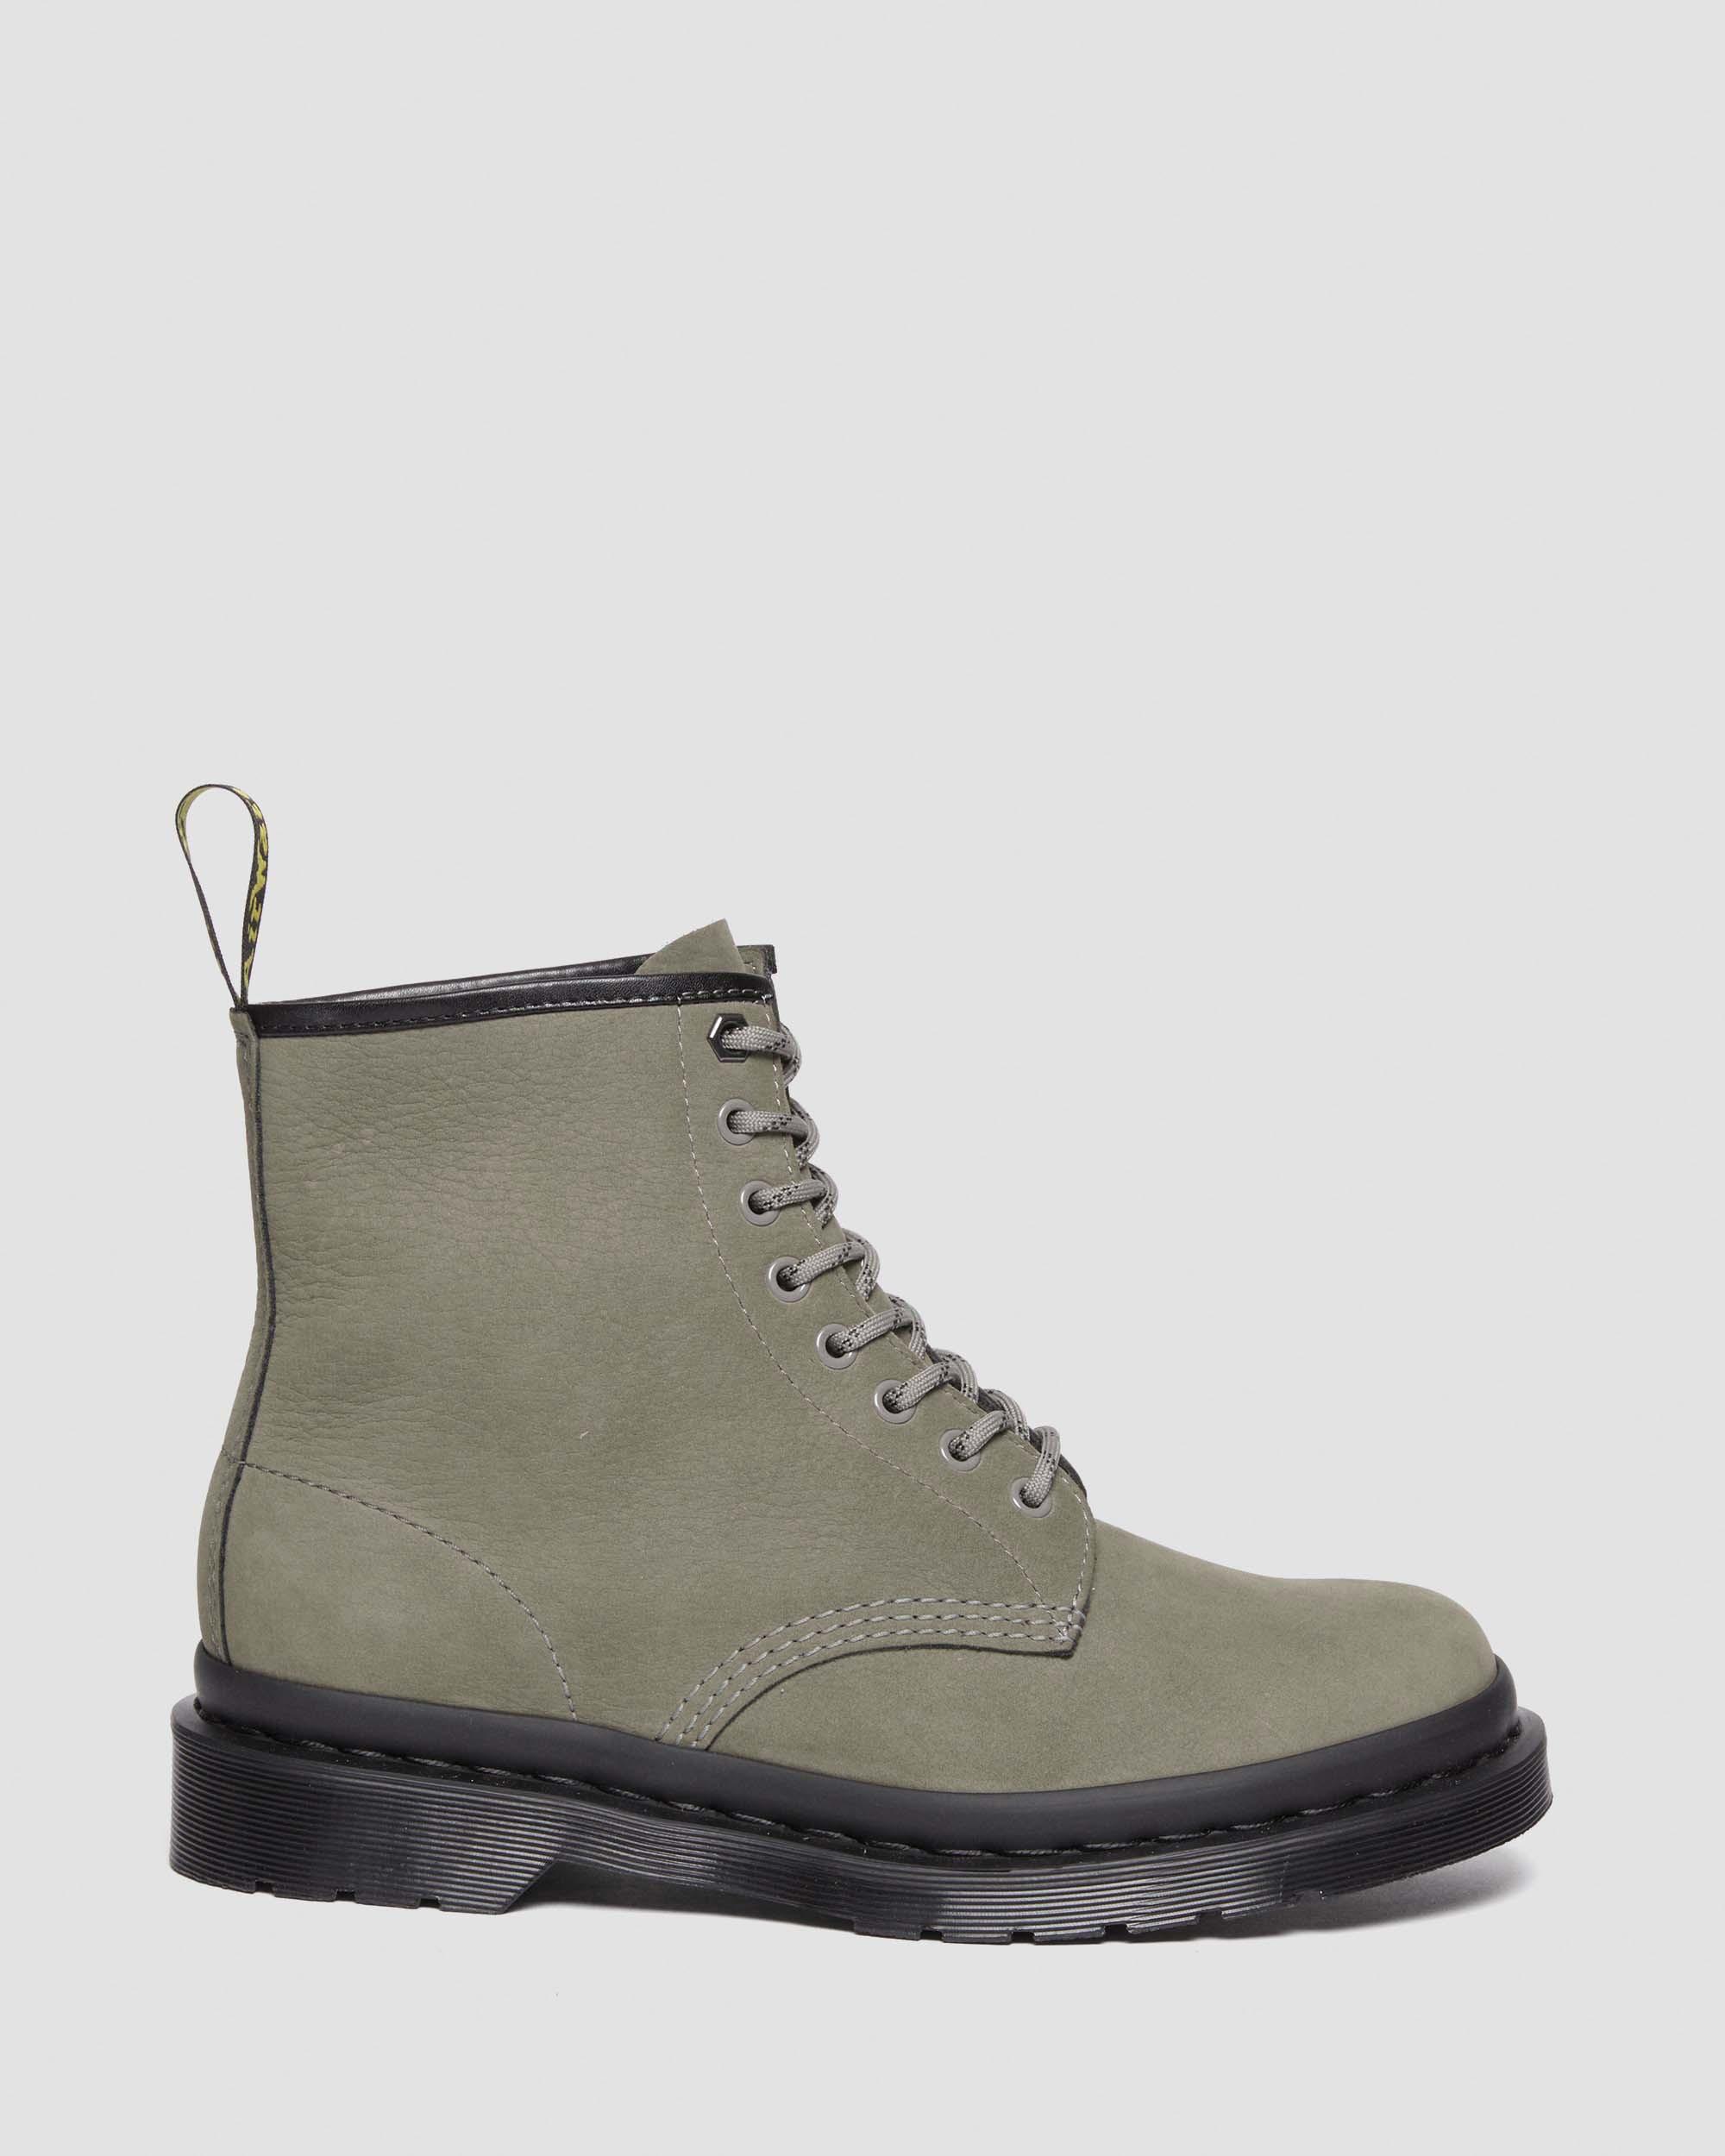 DR MARTENS 1460 Mono Milled Nubuck Lace Up Boots